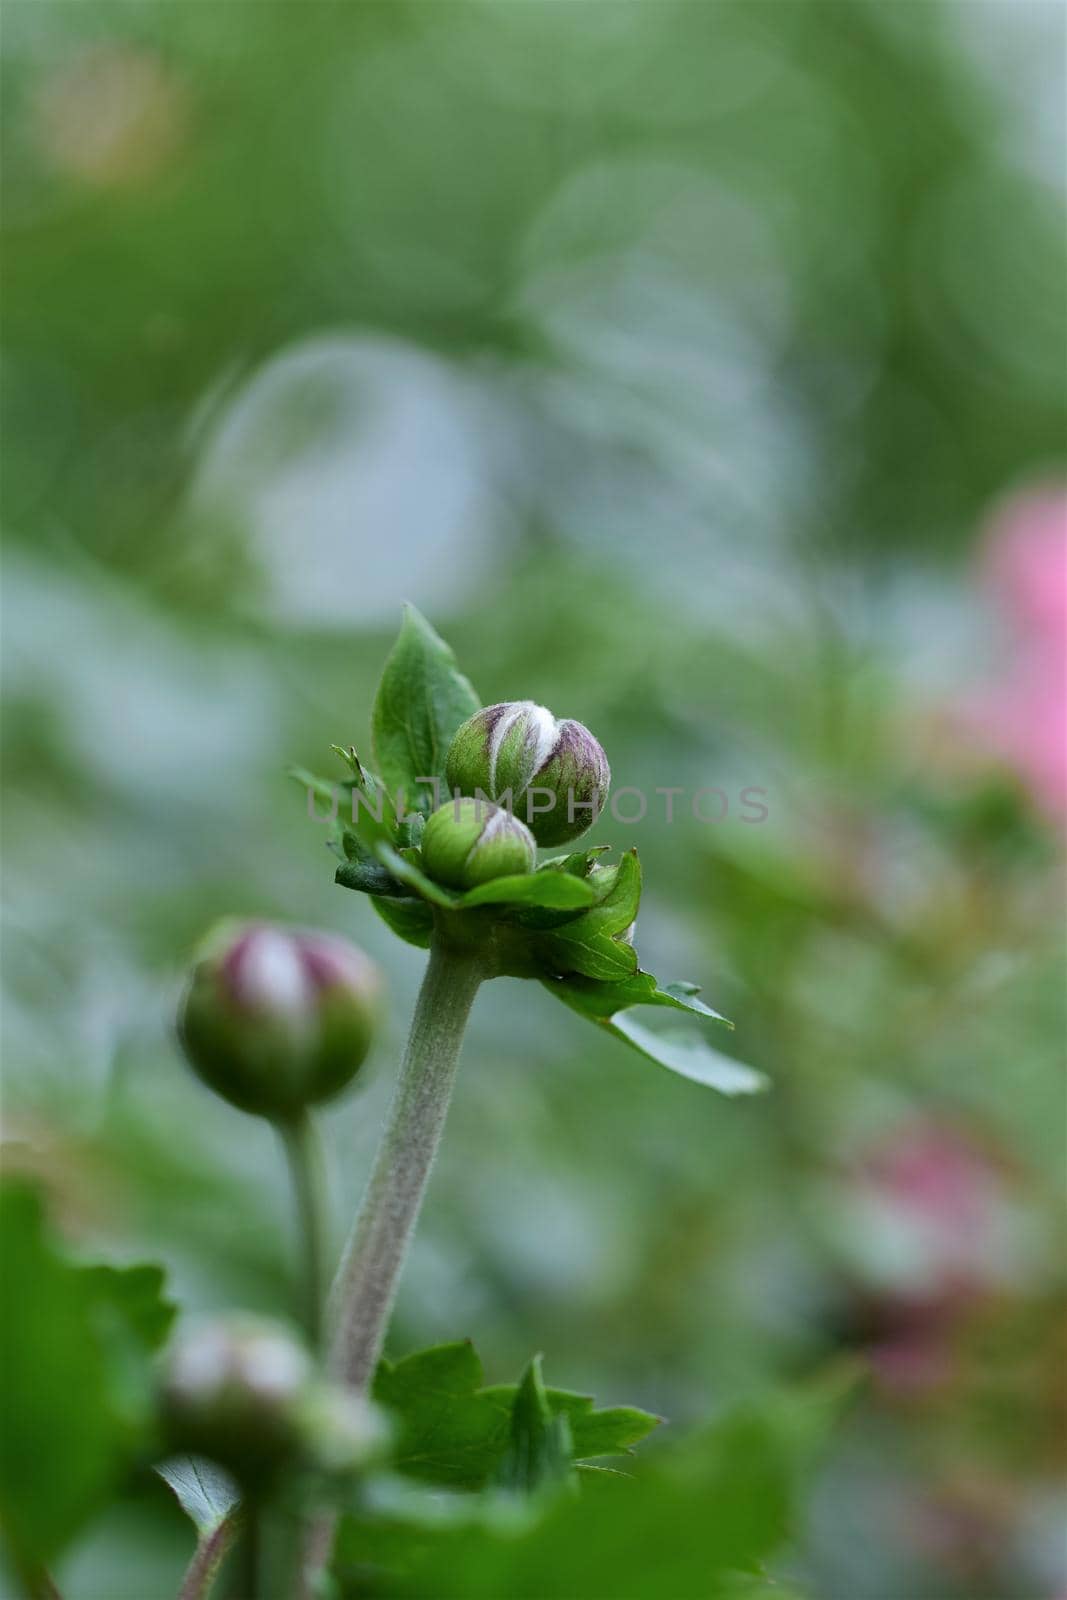 Autumn anemone buds against a blurred green background as a close up